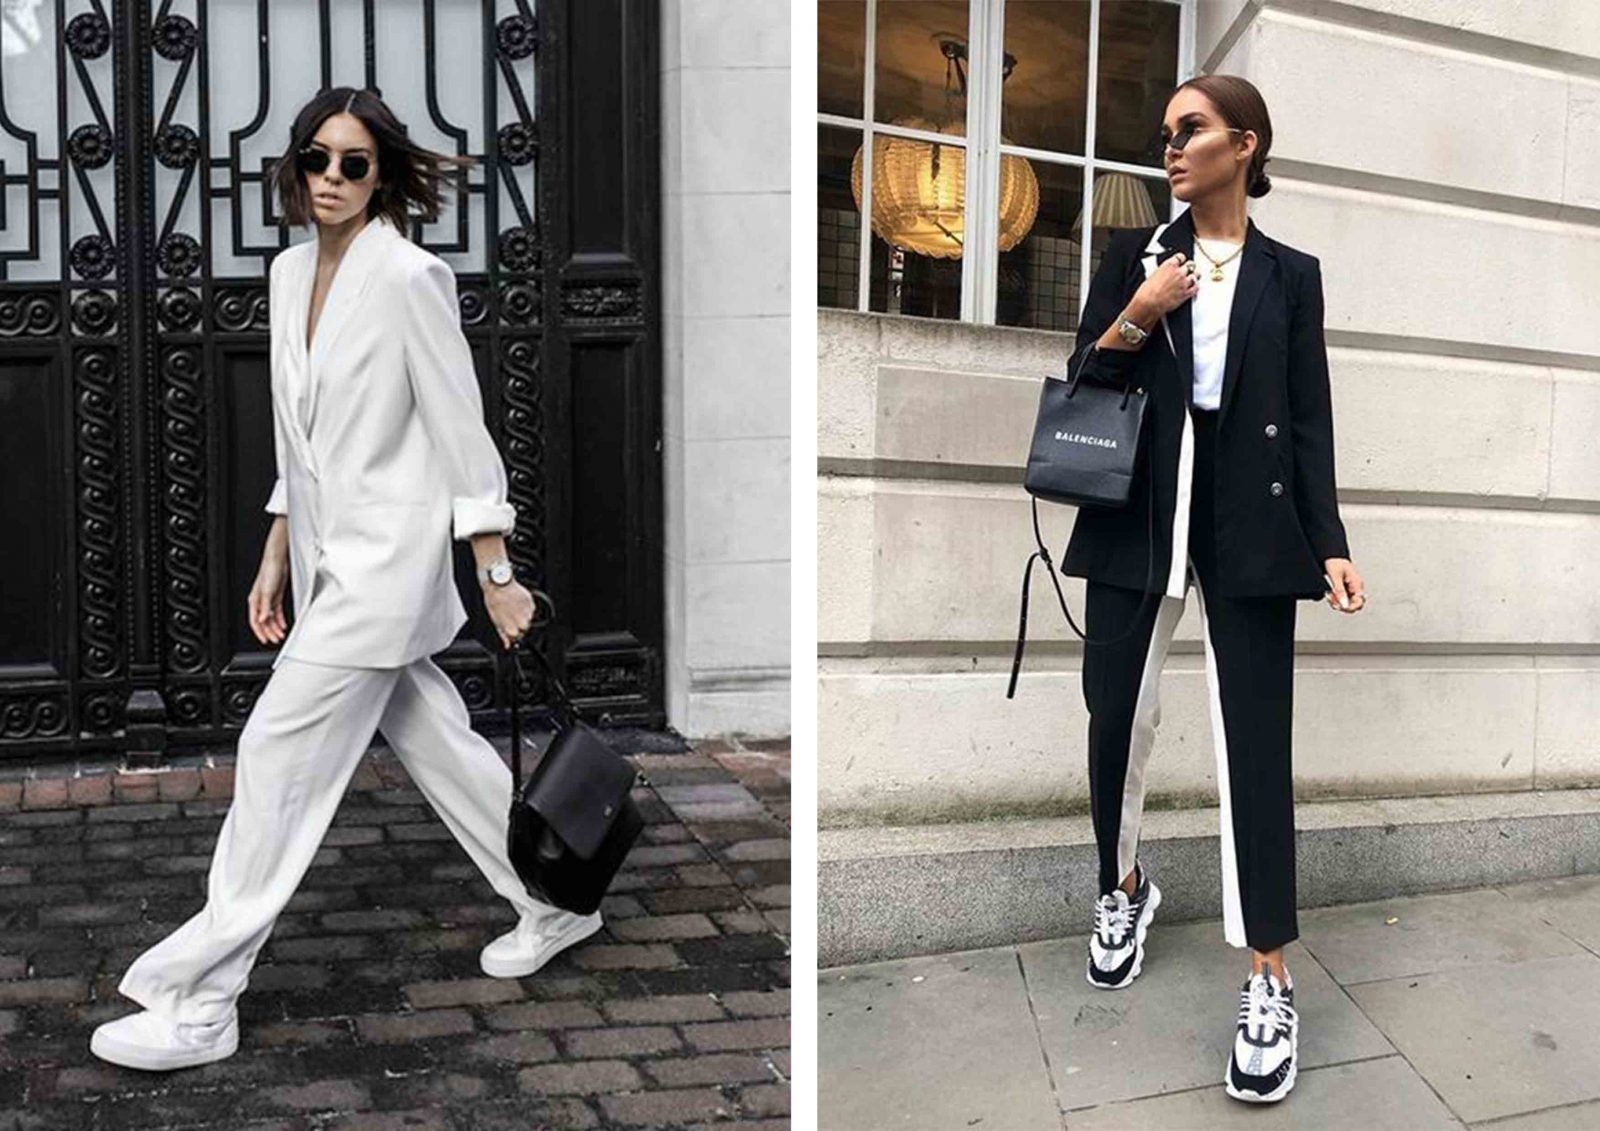 Women Suits and Sneaker Trend 